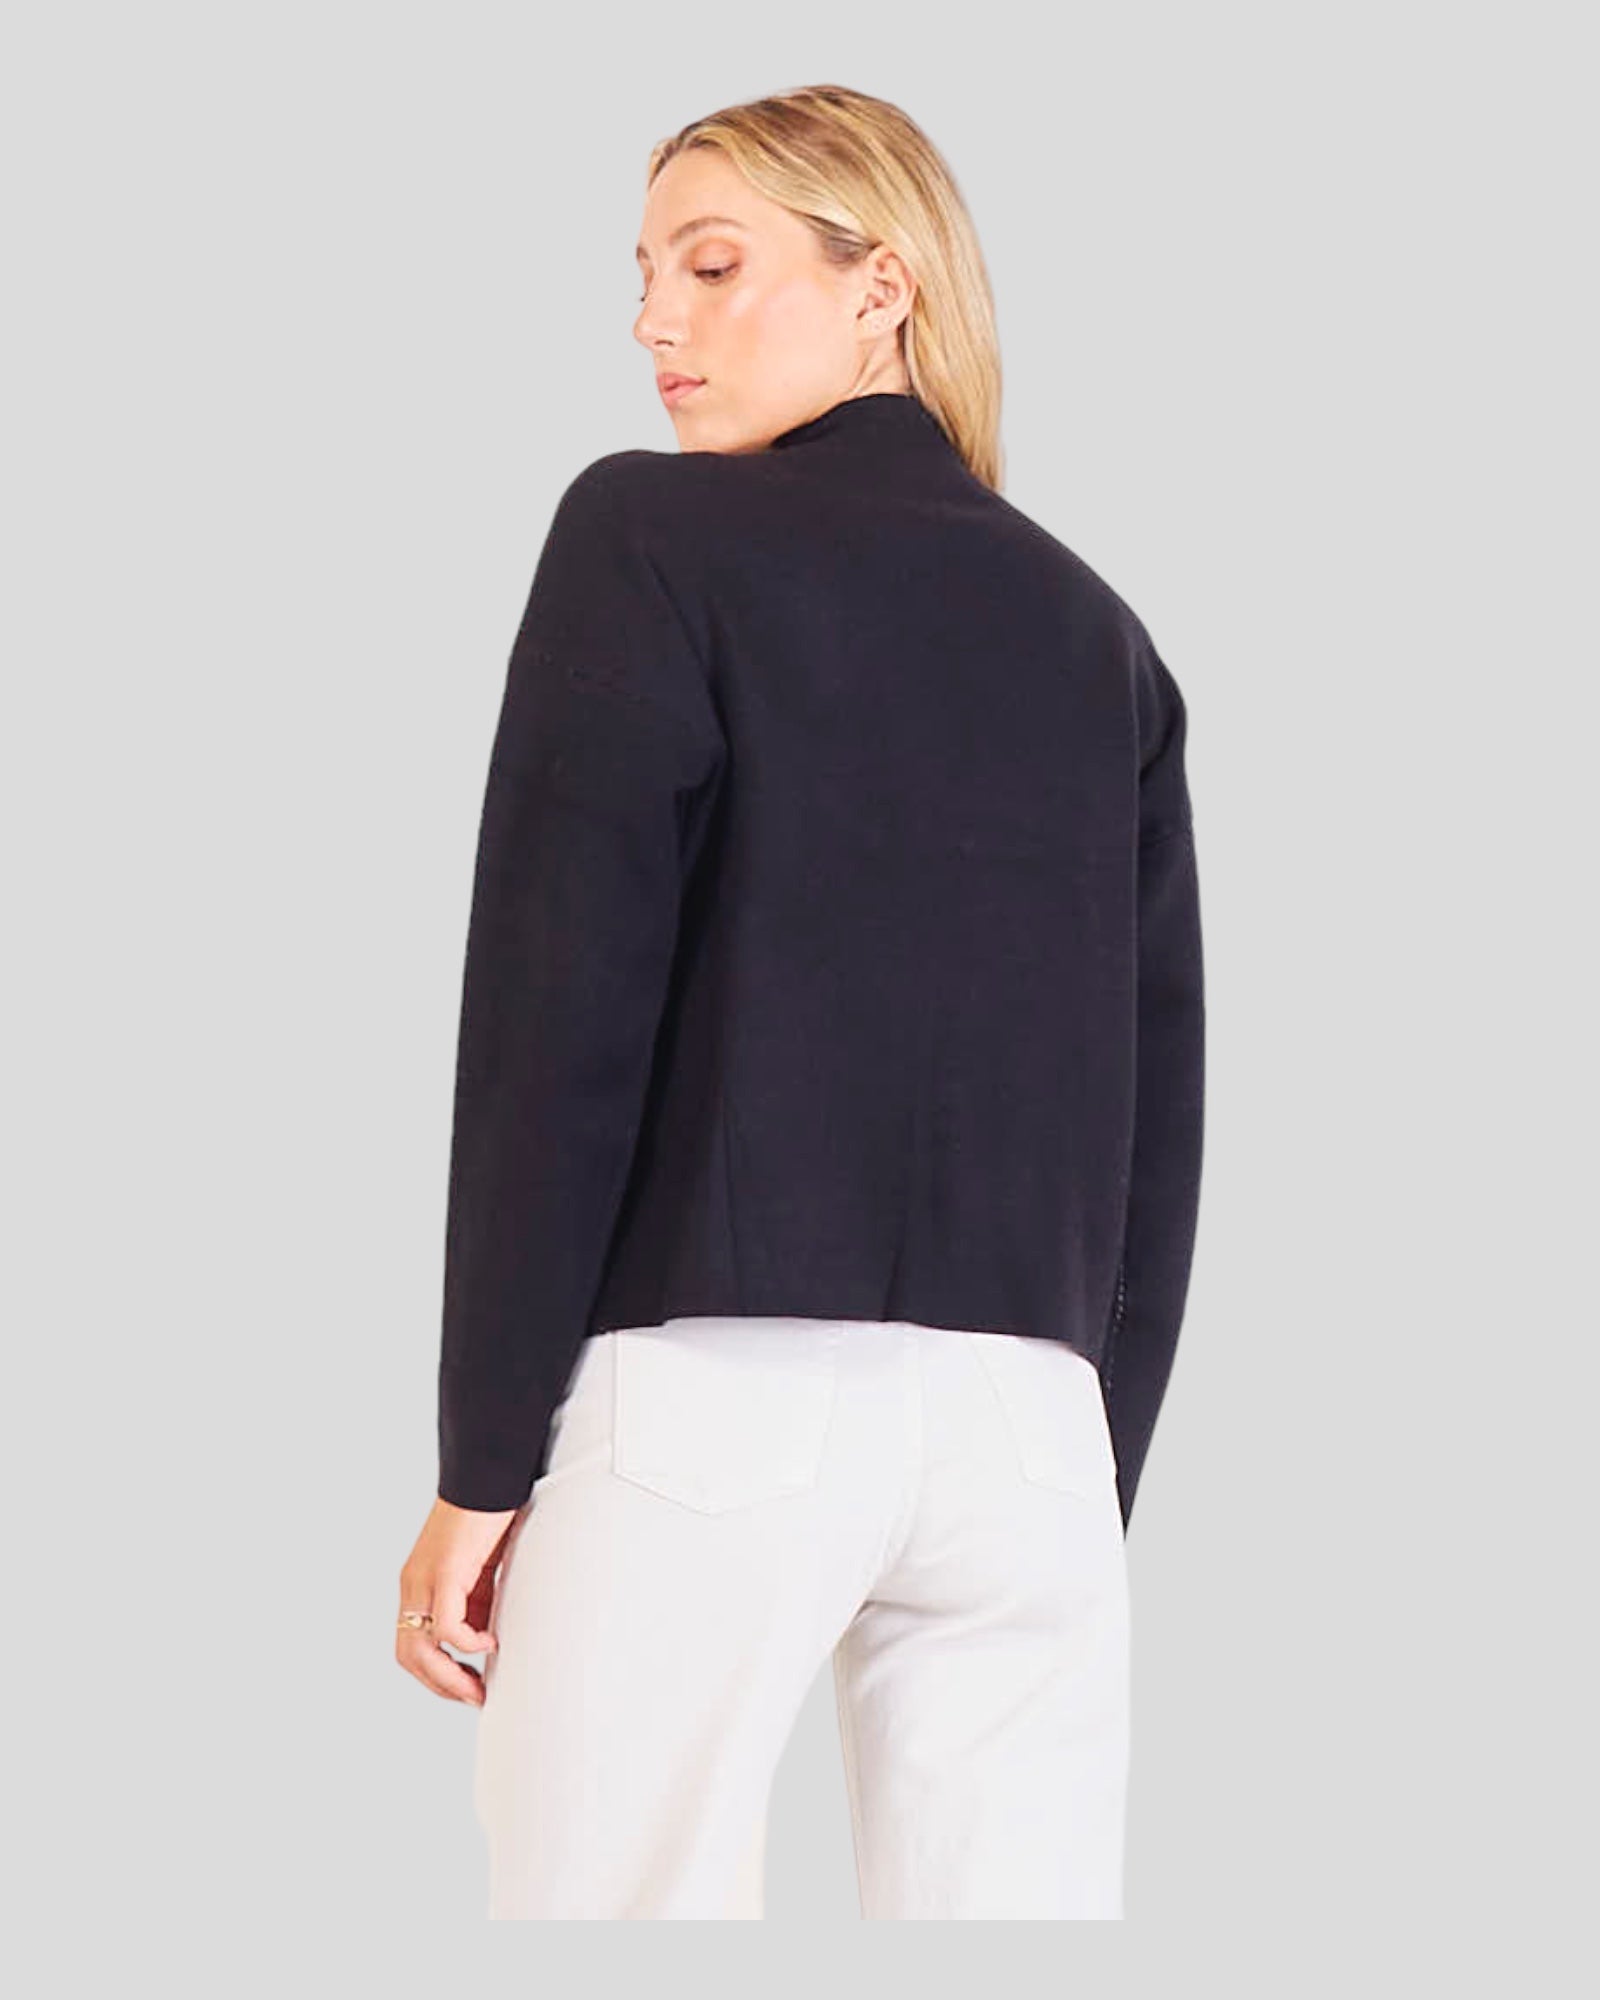 Sporty Sweater designed for dynamic style and chic comfort. Featuring large 'Amor' writing on the front, this sweater makes a bold statement. The slightly high collar adds a modern twist while ensuring coziness. 